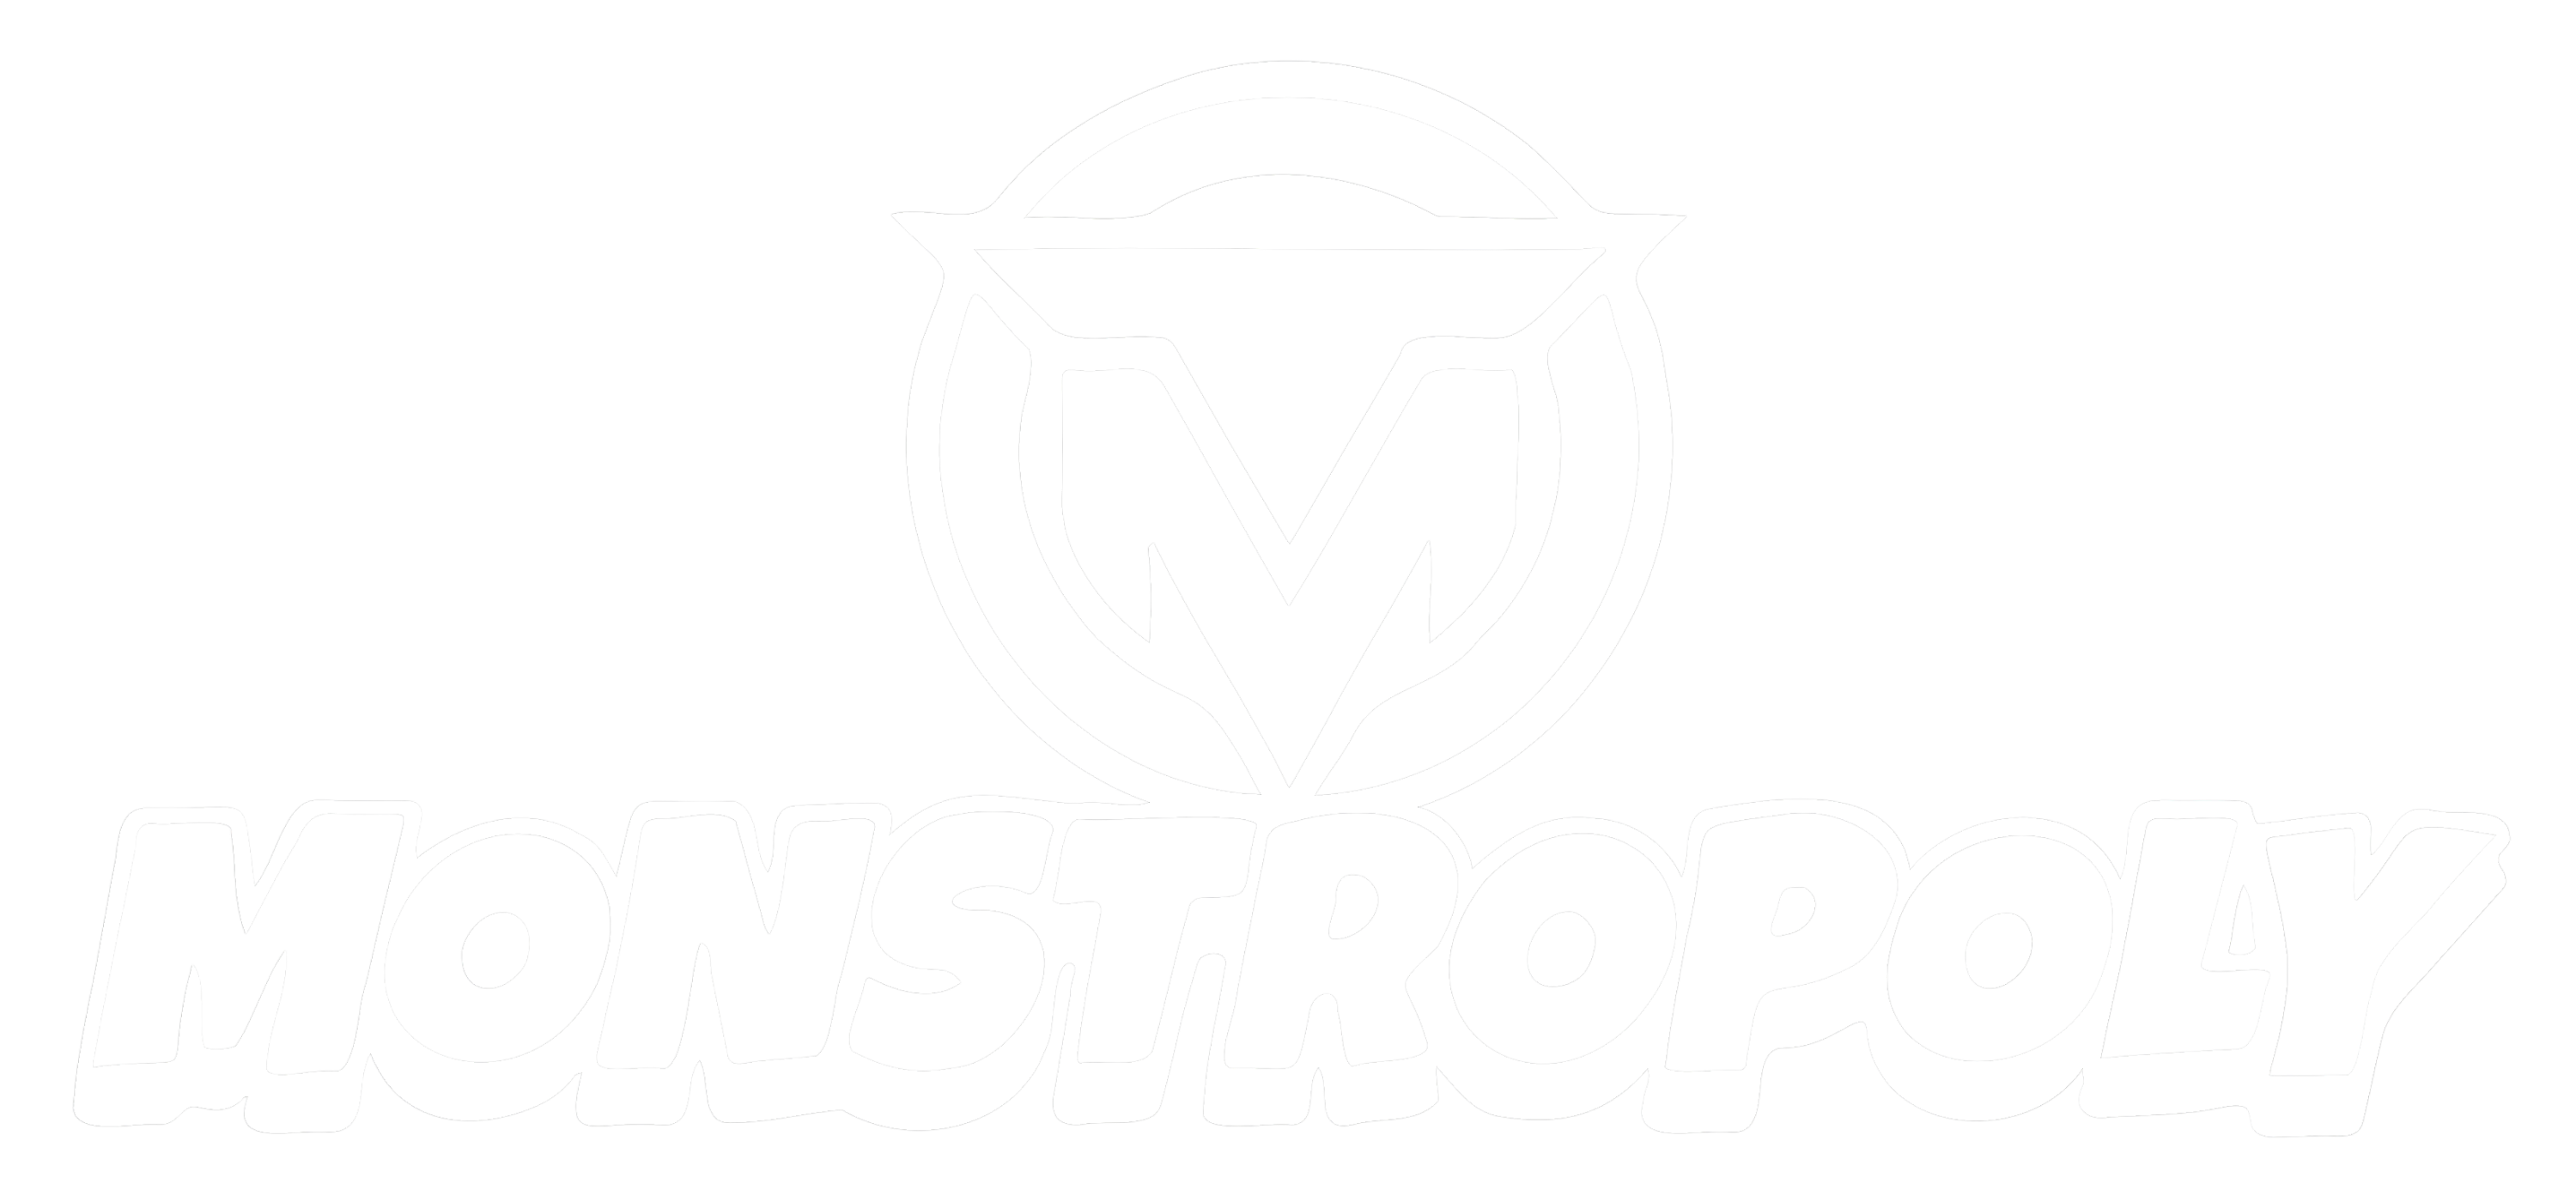 Monstropoly